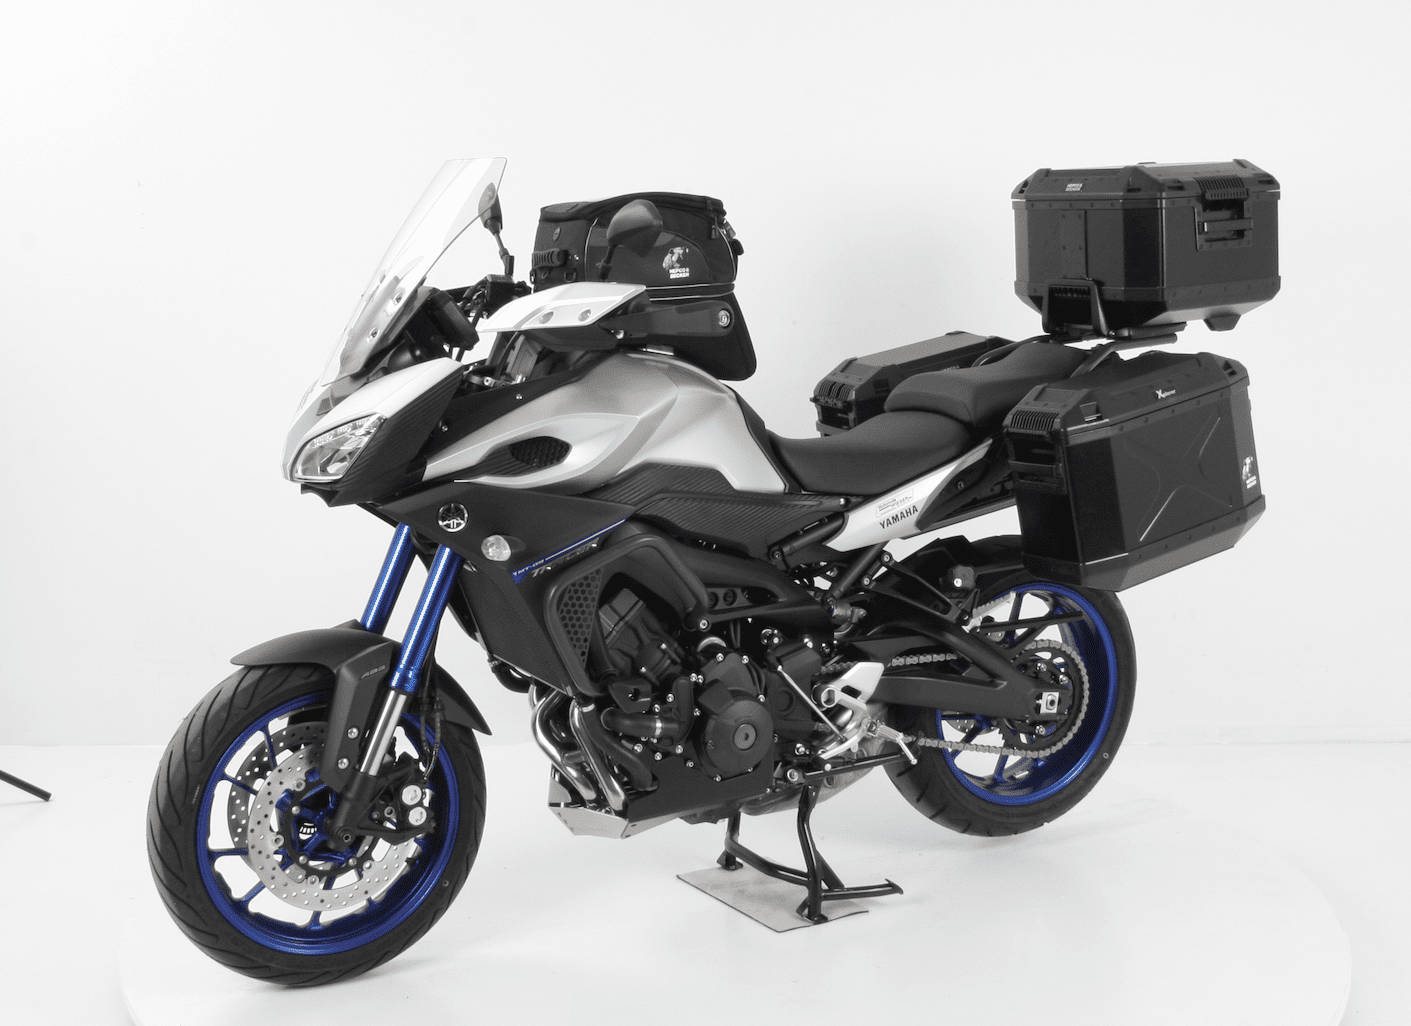 Alurack top case carrier anthracite/black for Yamaha MT-09 Tracer ABS (2015-2017)